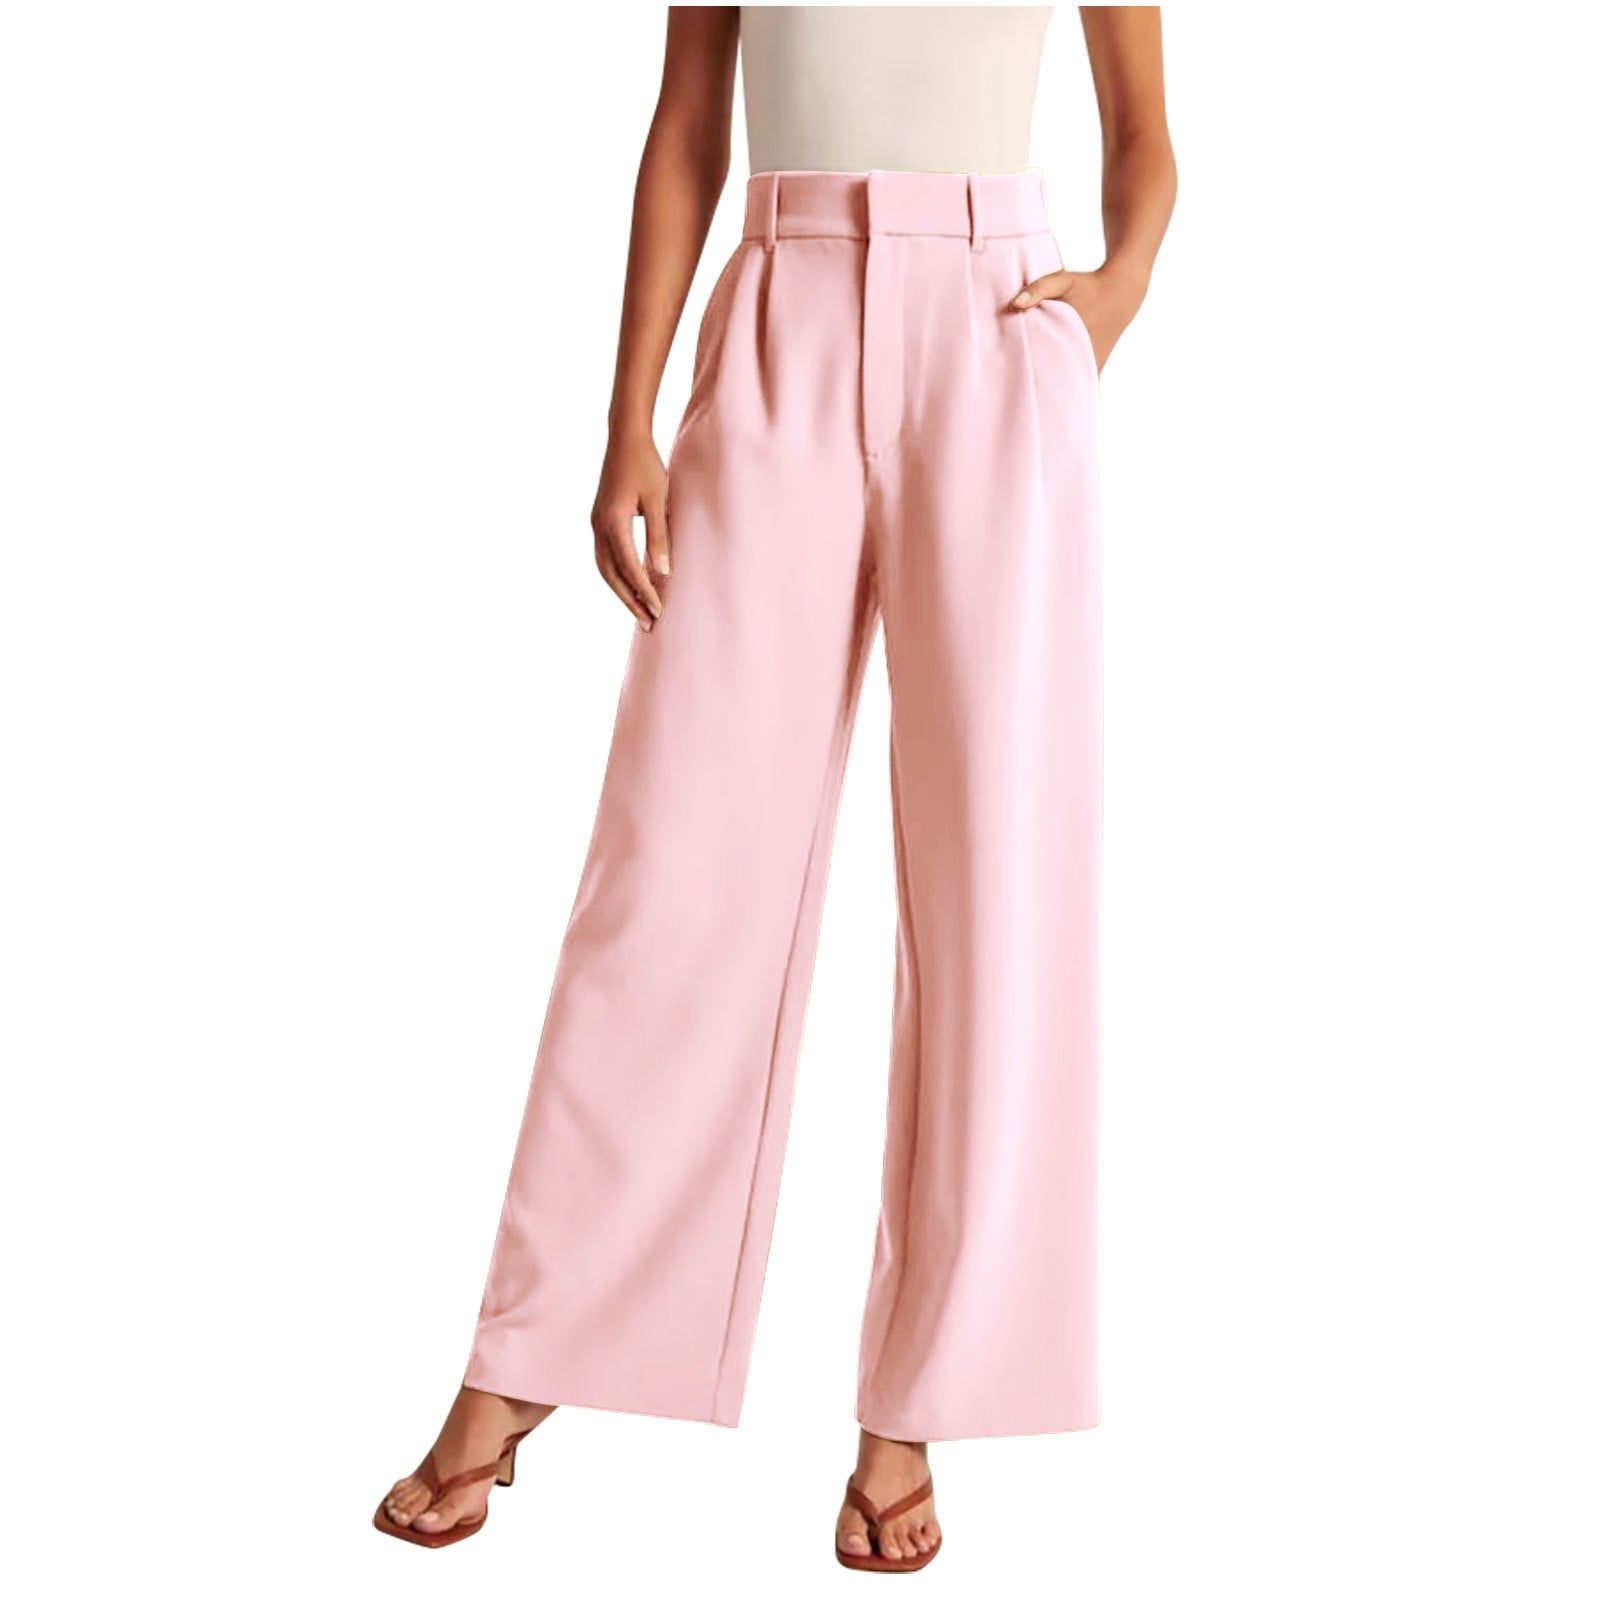 RYRJJ Plus Size Wide Leg Pants for Women Work Business Casual High Waisted  Dress Pants Comfy Flowy Trousers Office(Pink,S) 